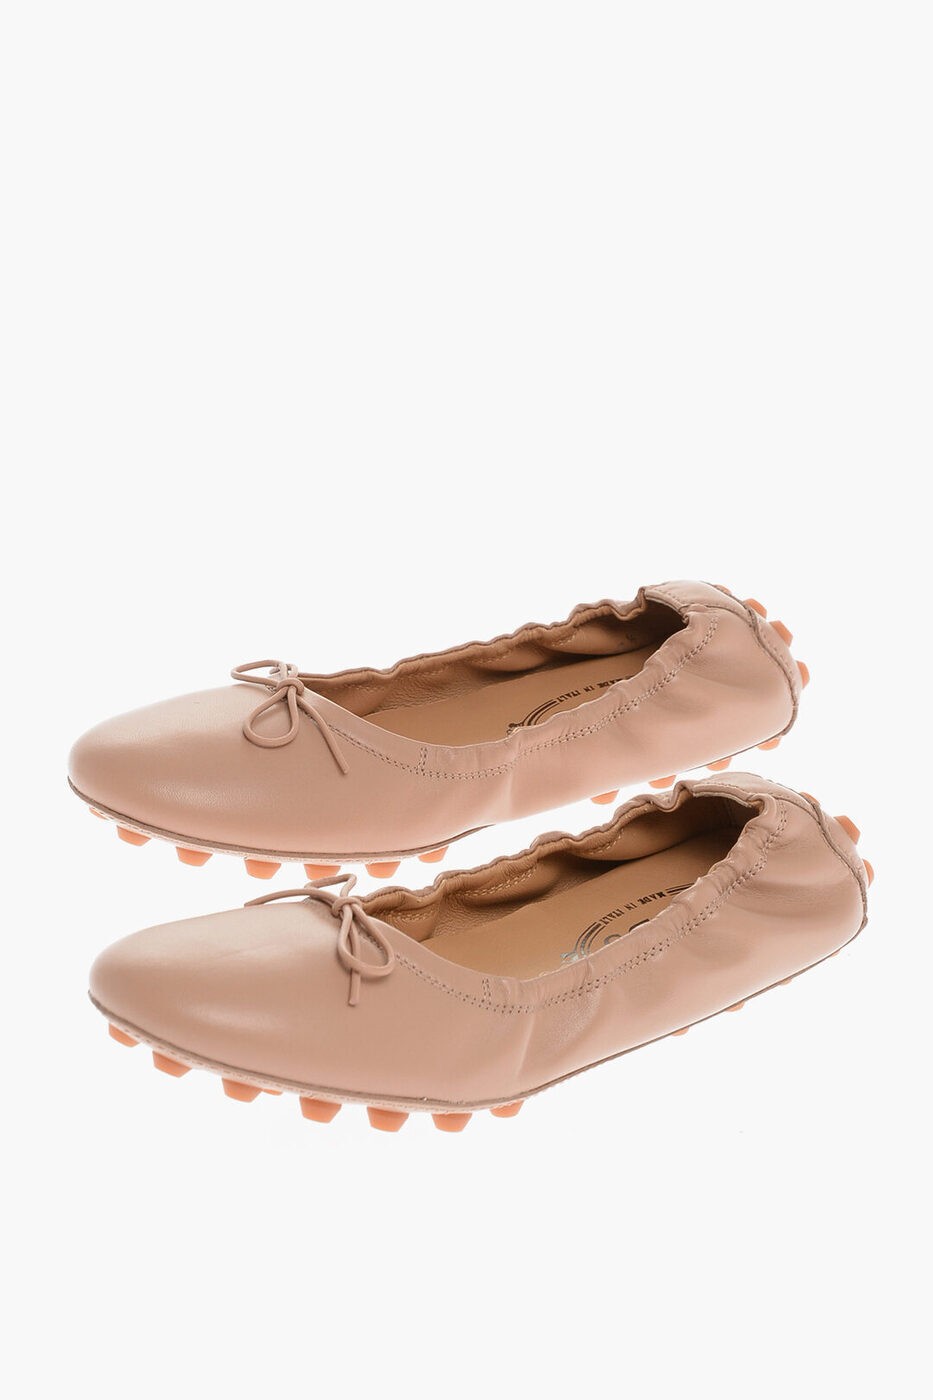 TOD'S トッズ フラットシューズ XXW76K0HD20 SOM M033 レディース LEATHER 76K BALLET FLATS WITH GROMMETS ON SOLE 【関税・送料無料】【ラッピング無料】 dk